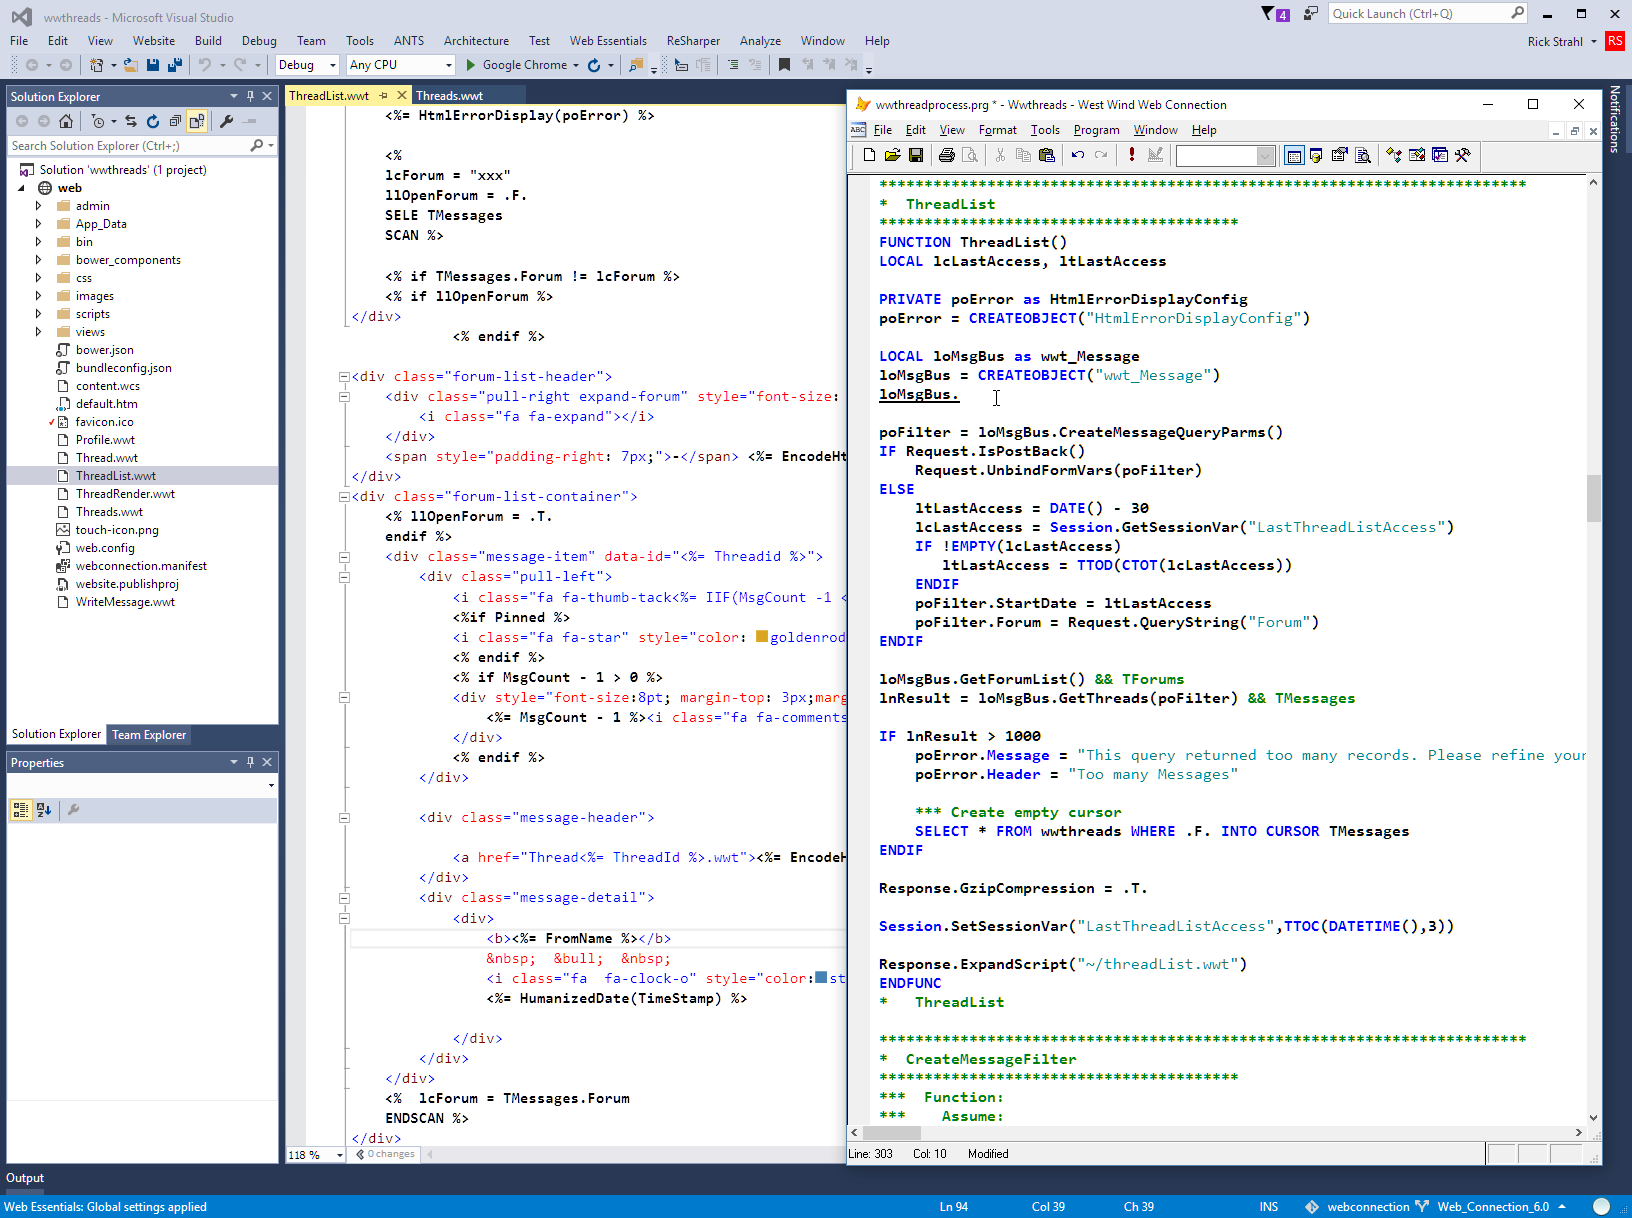 Visual Studio offers templates and an add-in to jump to FoxPro code.